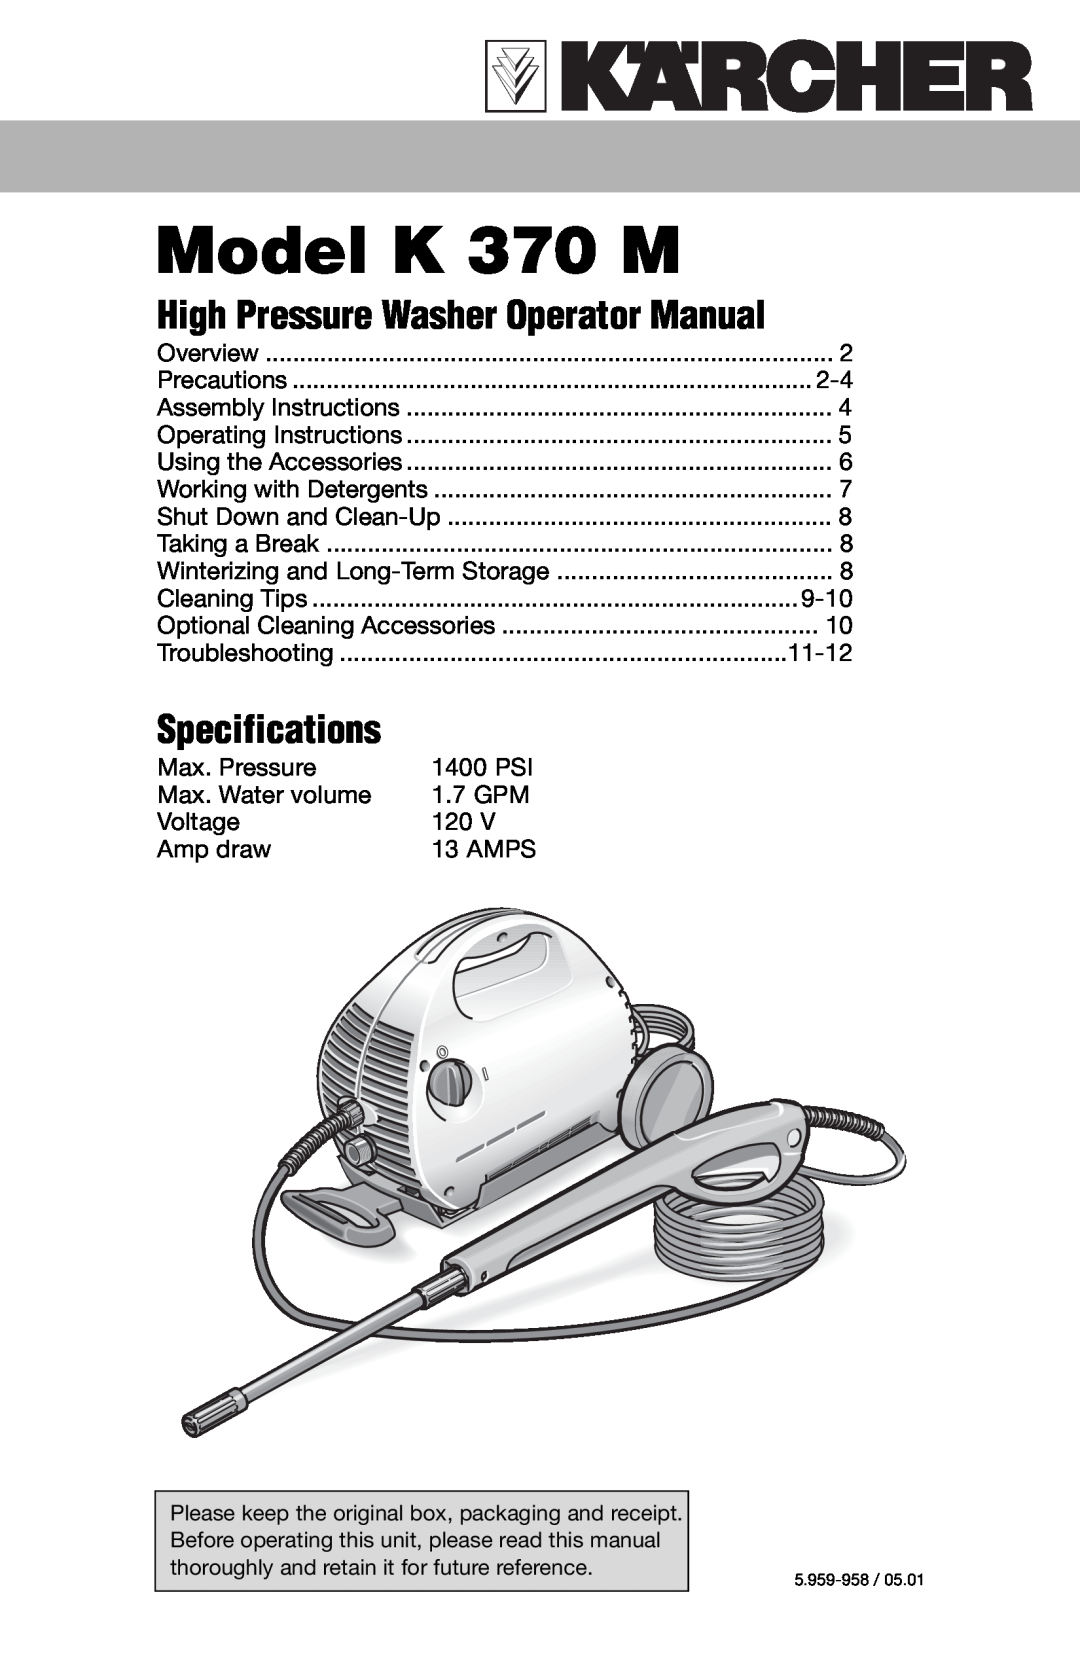 Karcher specifications High Pressure Washer Operator Manual, Model K 370 M, Specifications 